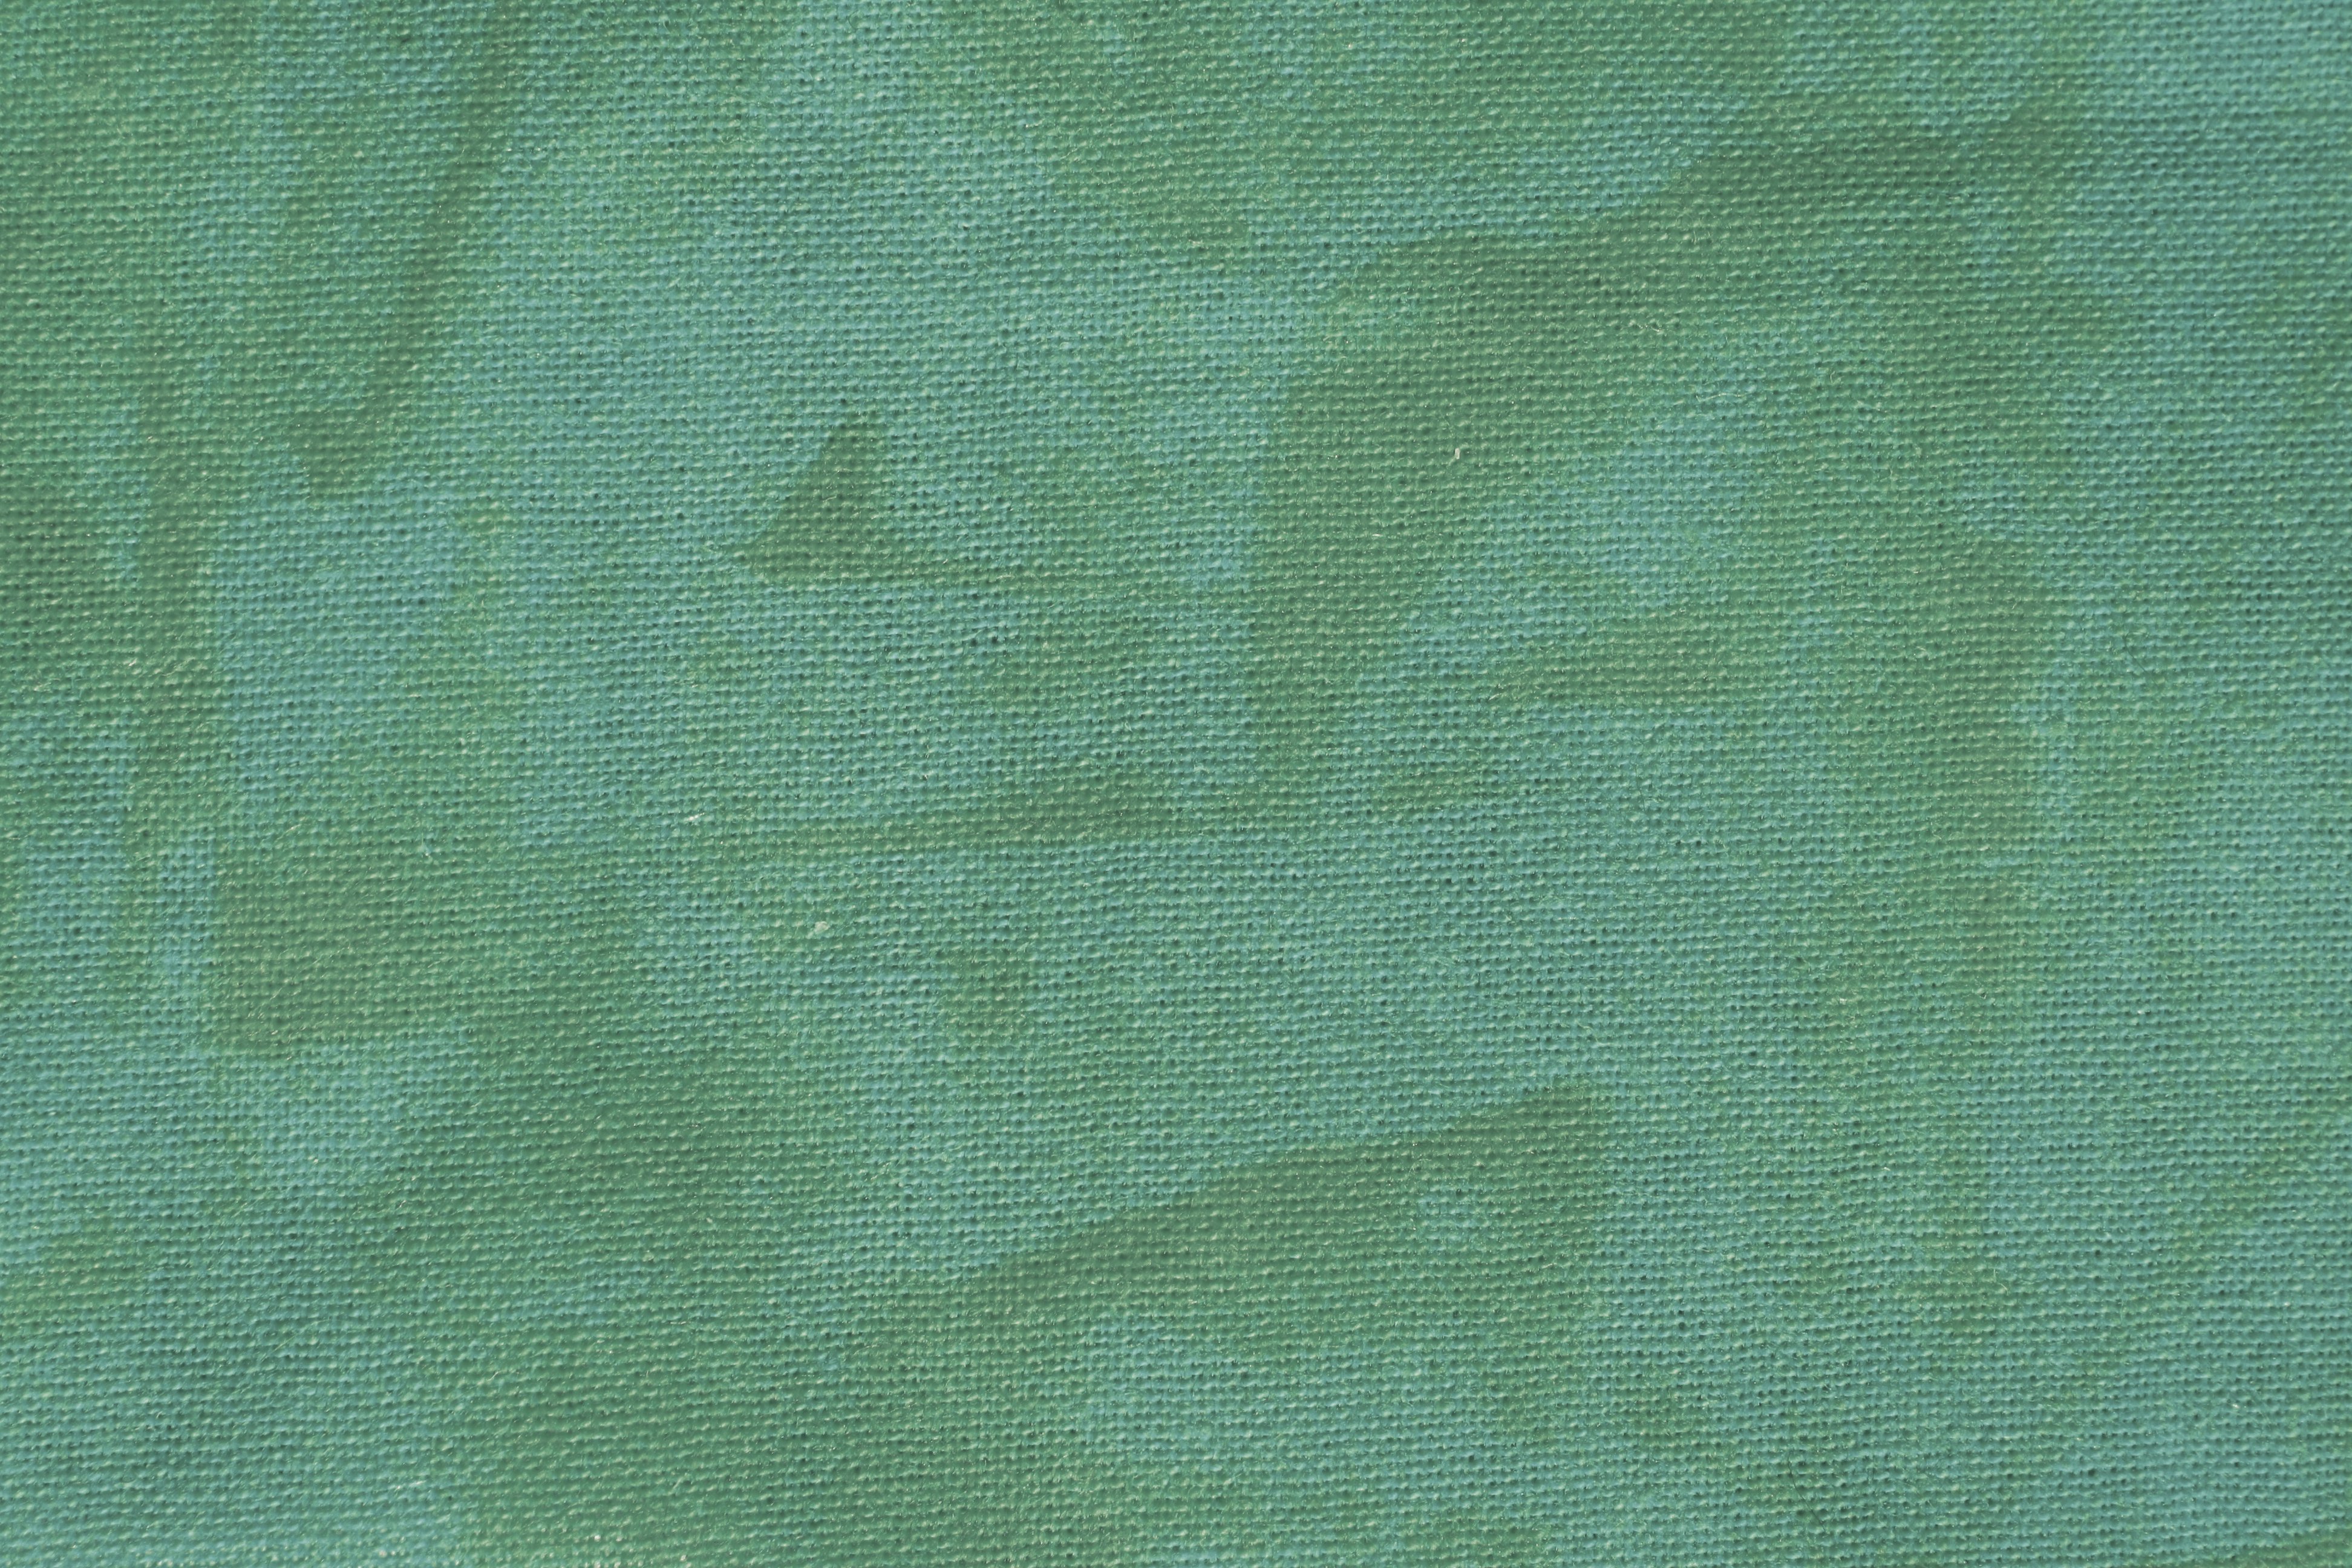 Sage Green Mottled Fabric Texture Picture Free Photograph Photos